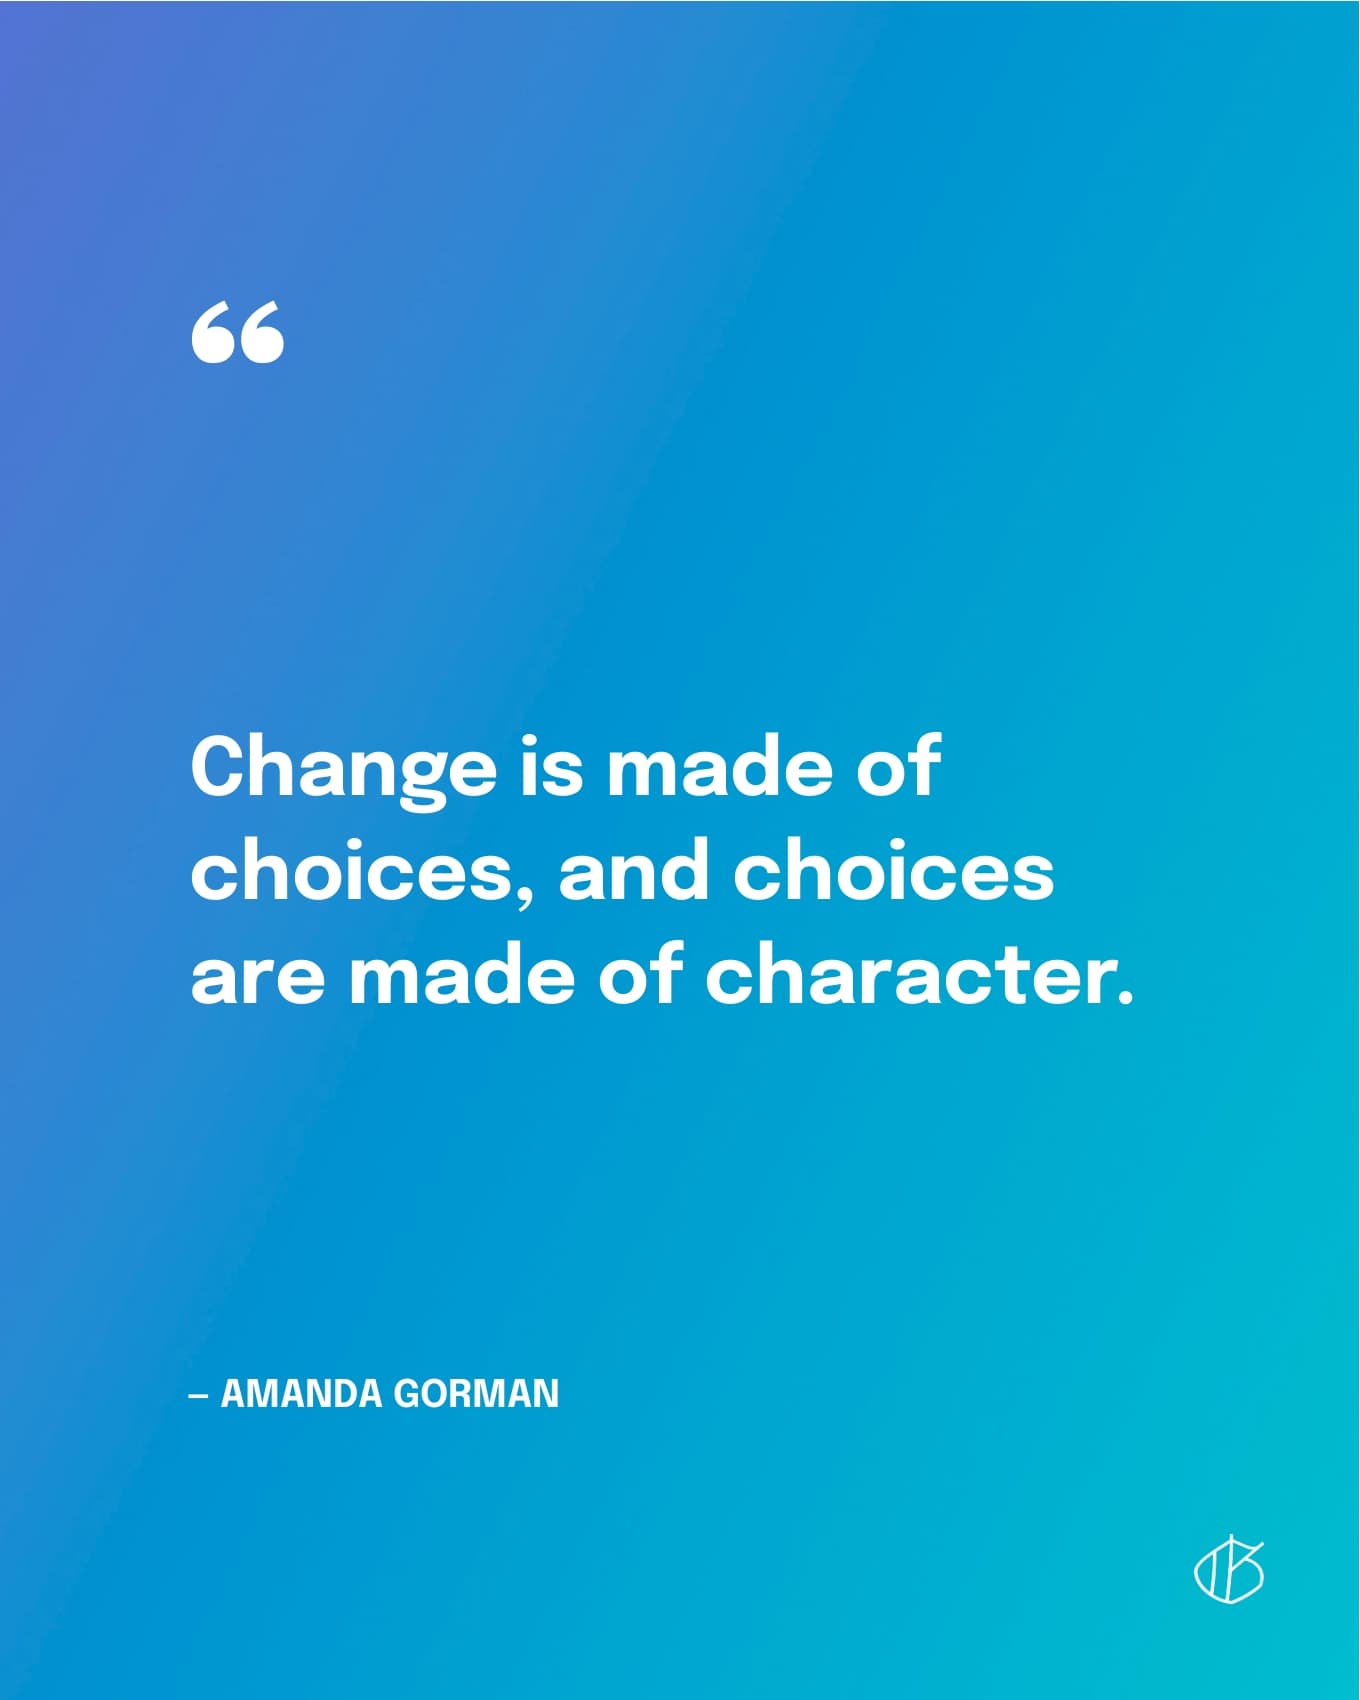 Change is made of choices, and choices are made of character. — Amanda Gorman